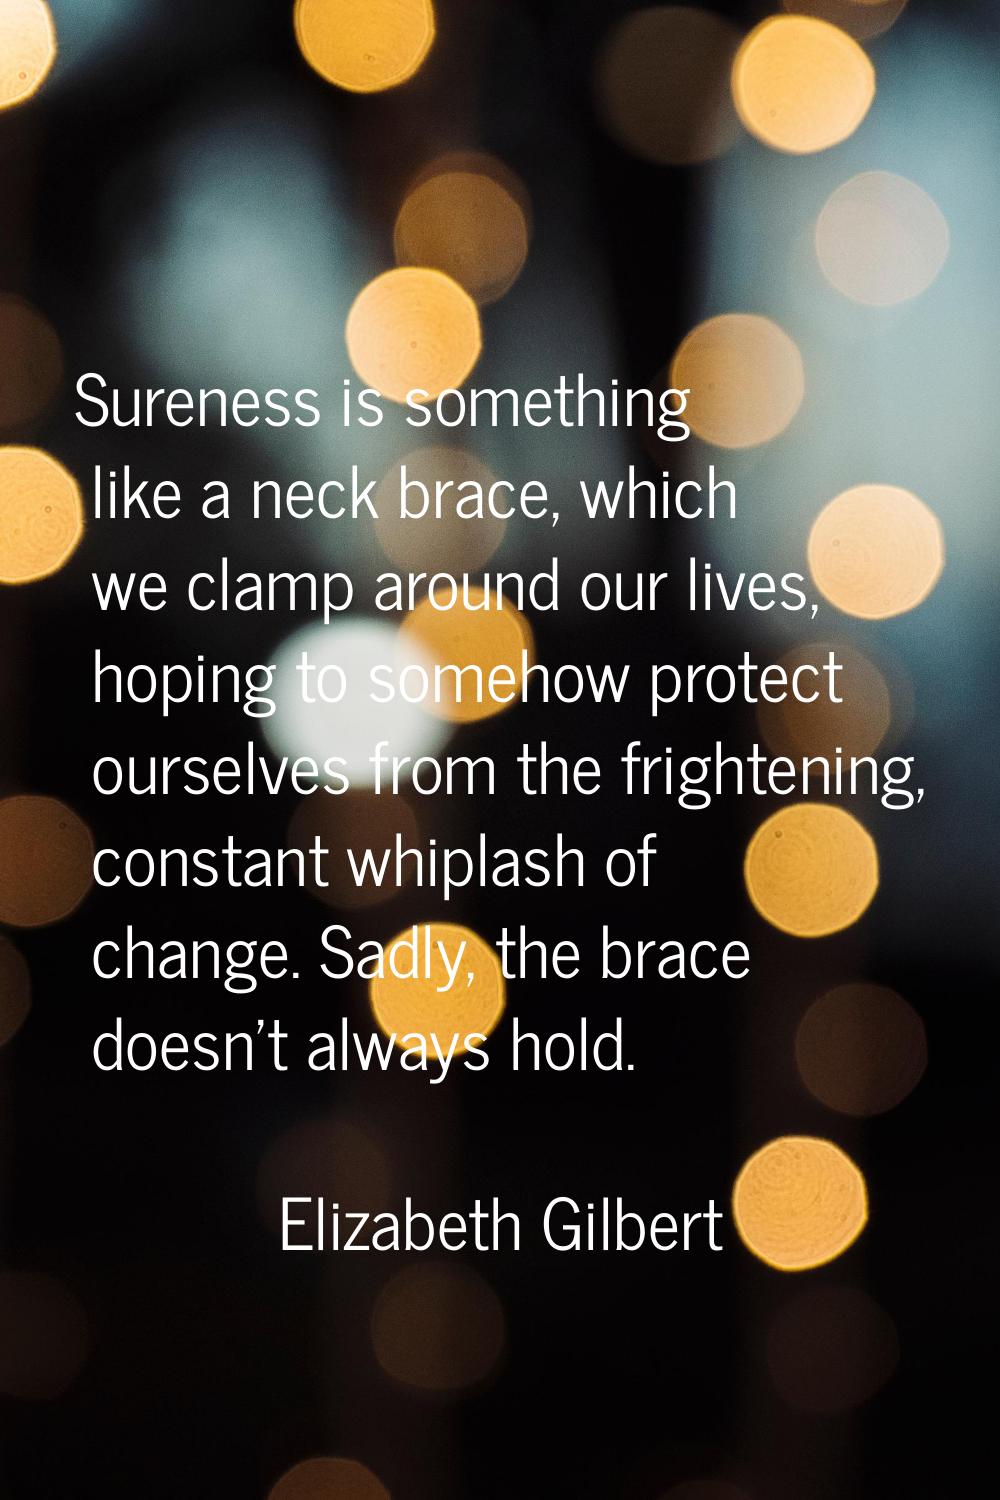 Sureness is something like a neck brace, which we clamp around our lives, hoping to somehow protect